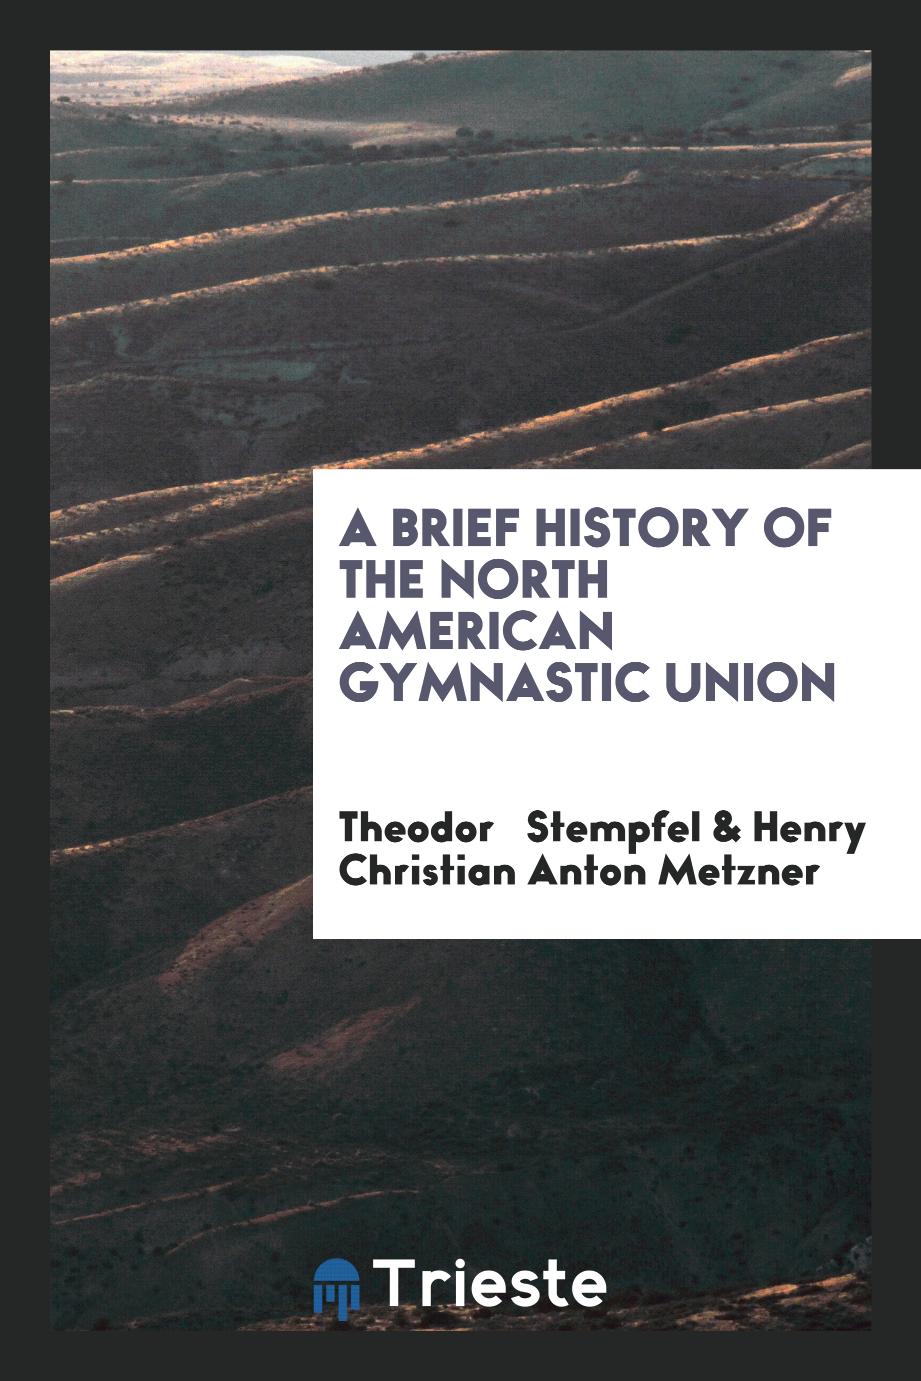 A Brief History of the North American Gymnastic Union